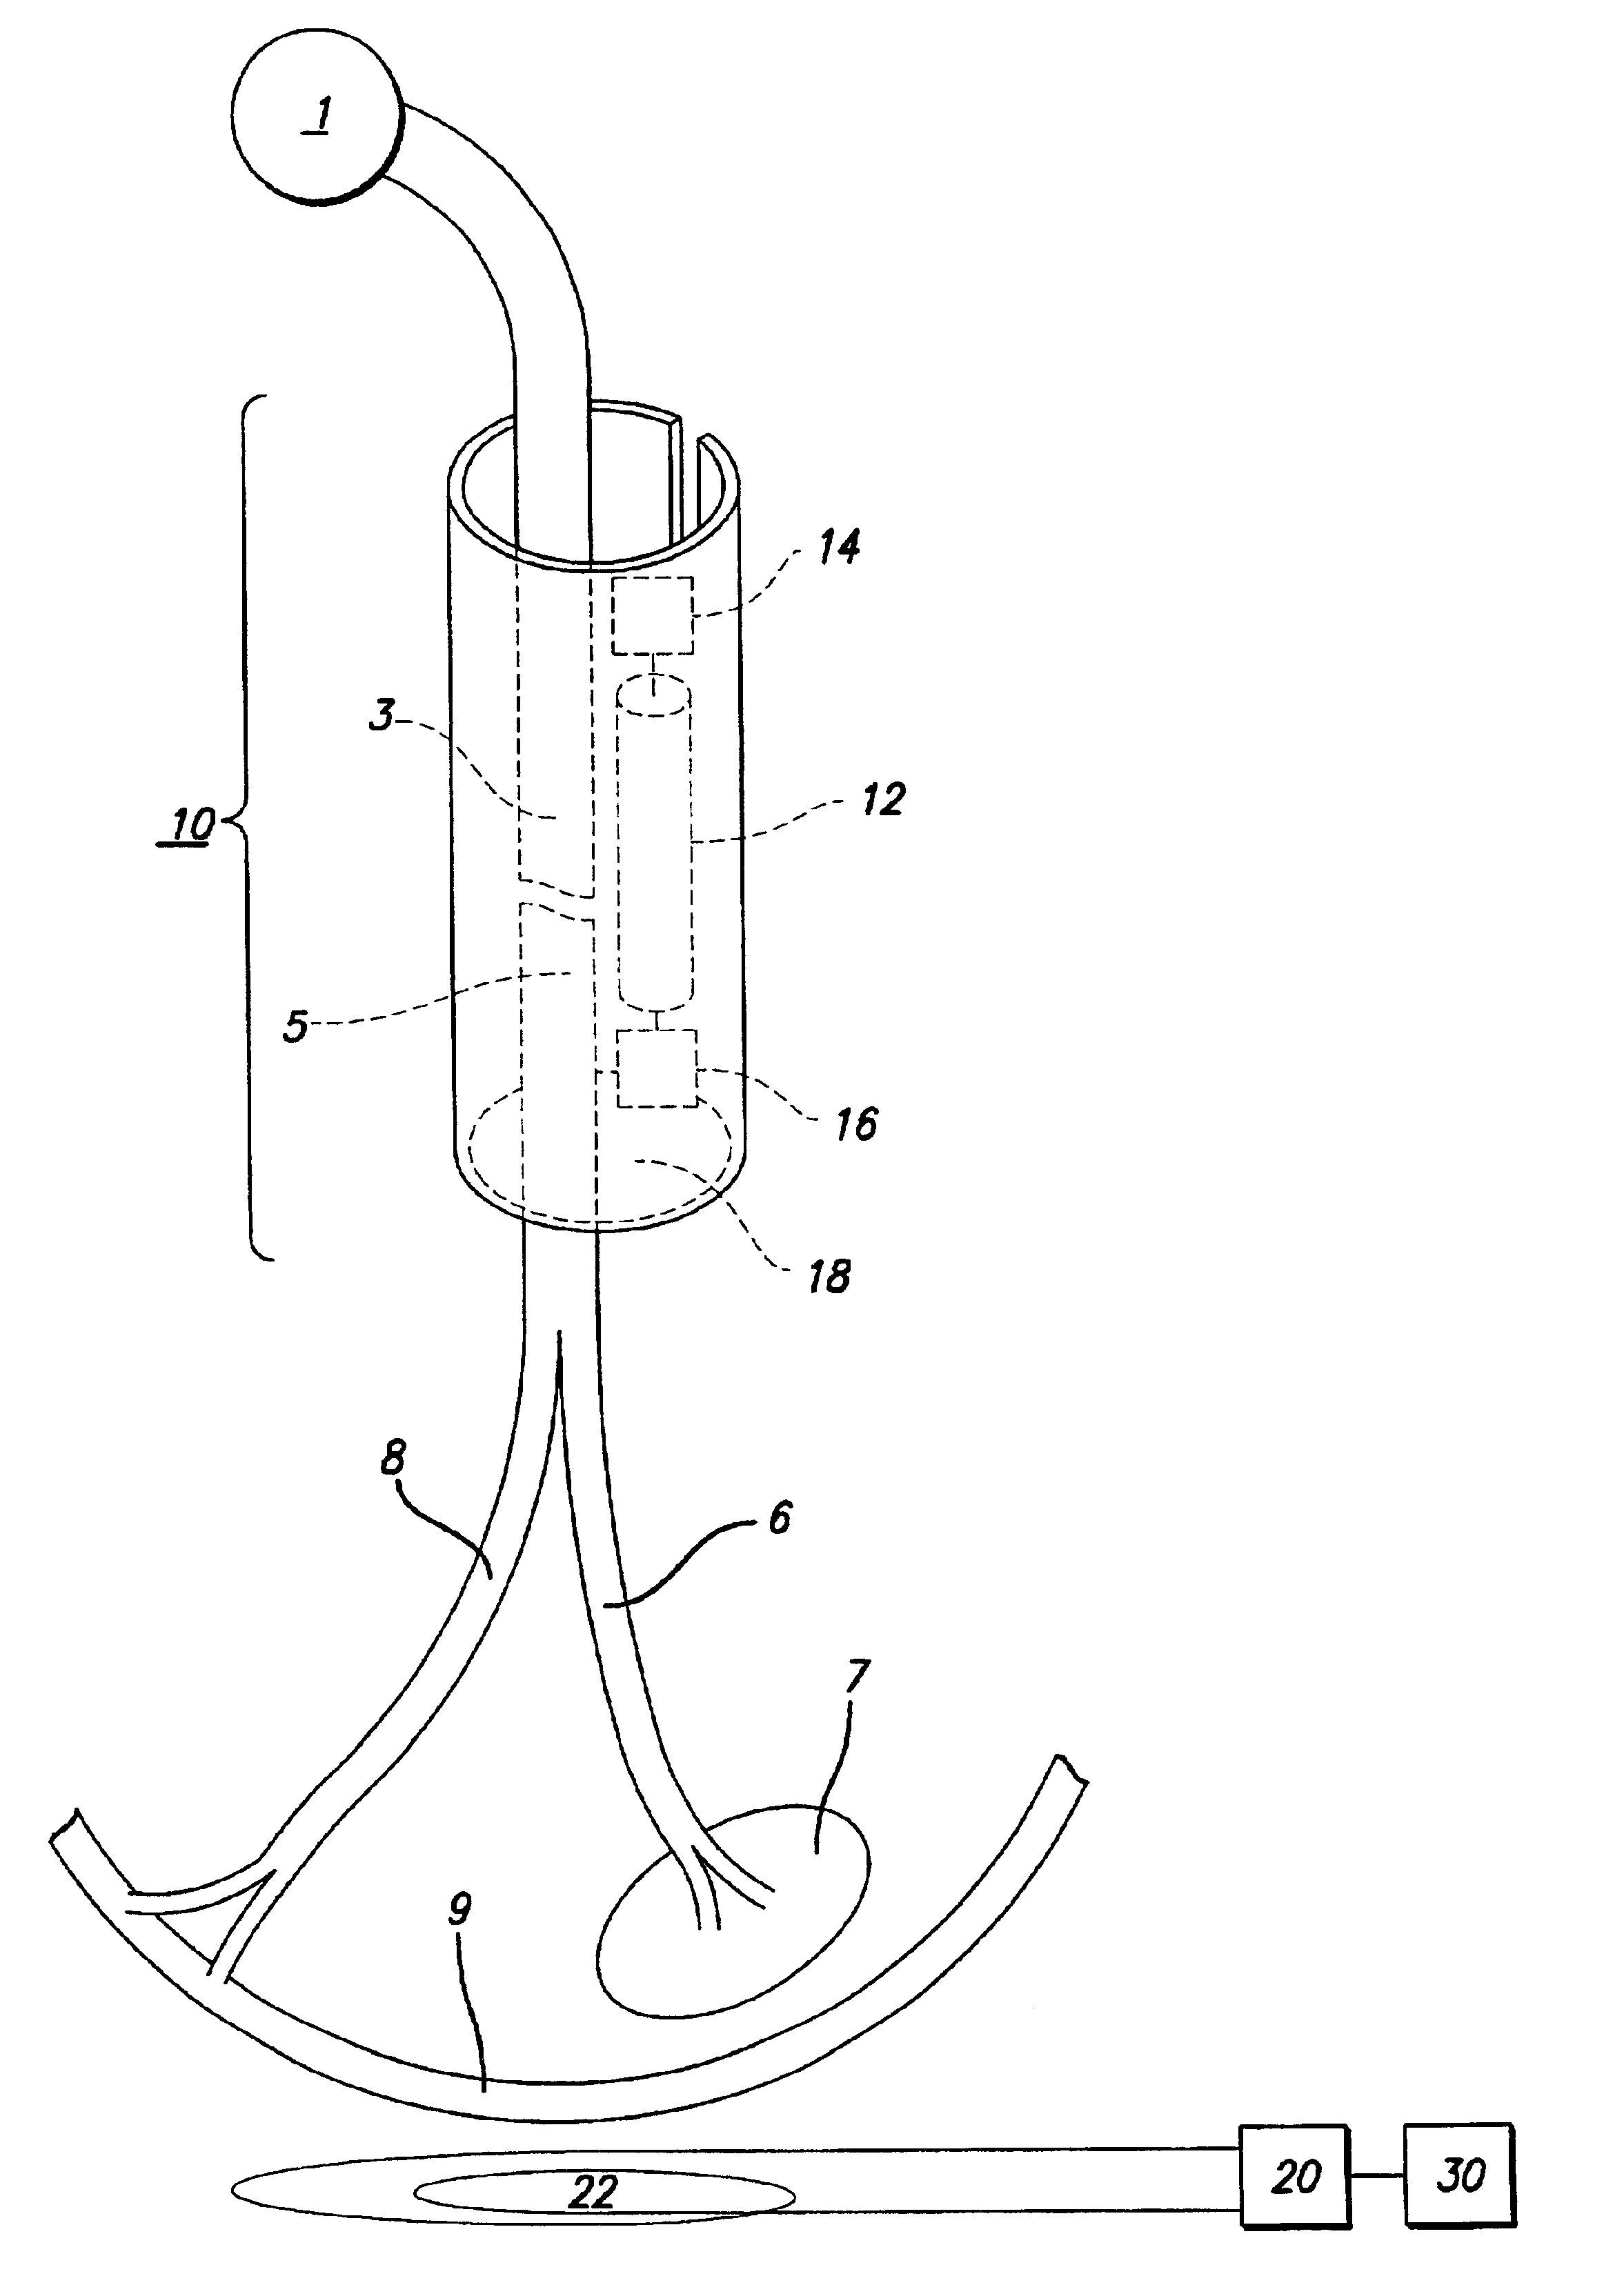 System and method for providing recovery from muscle denervation